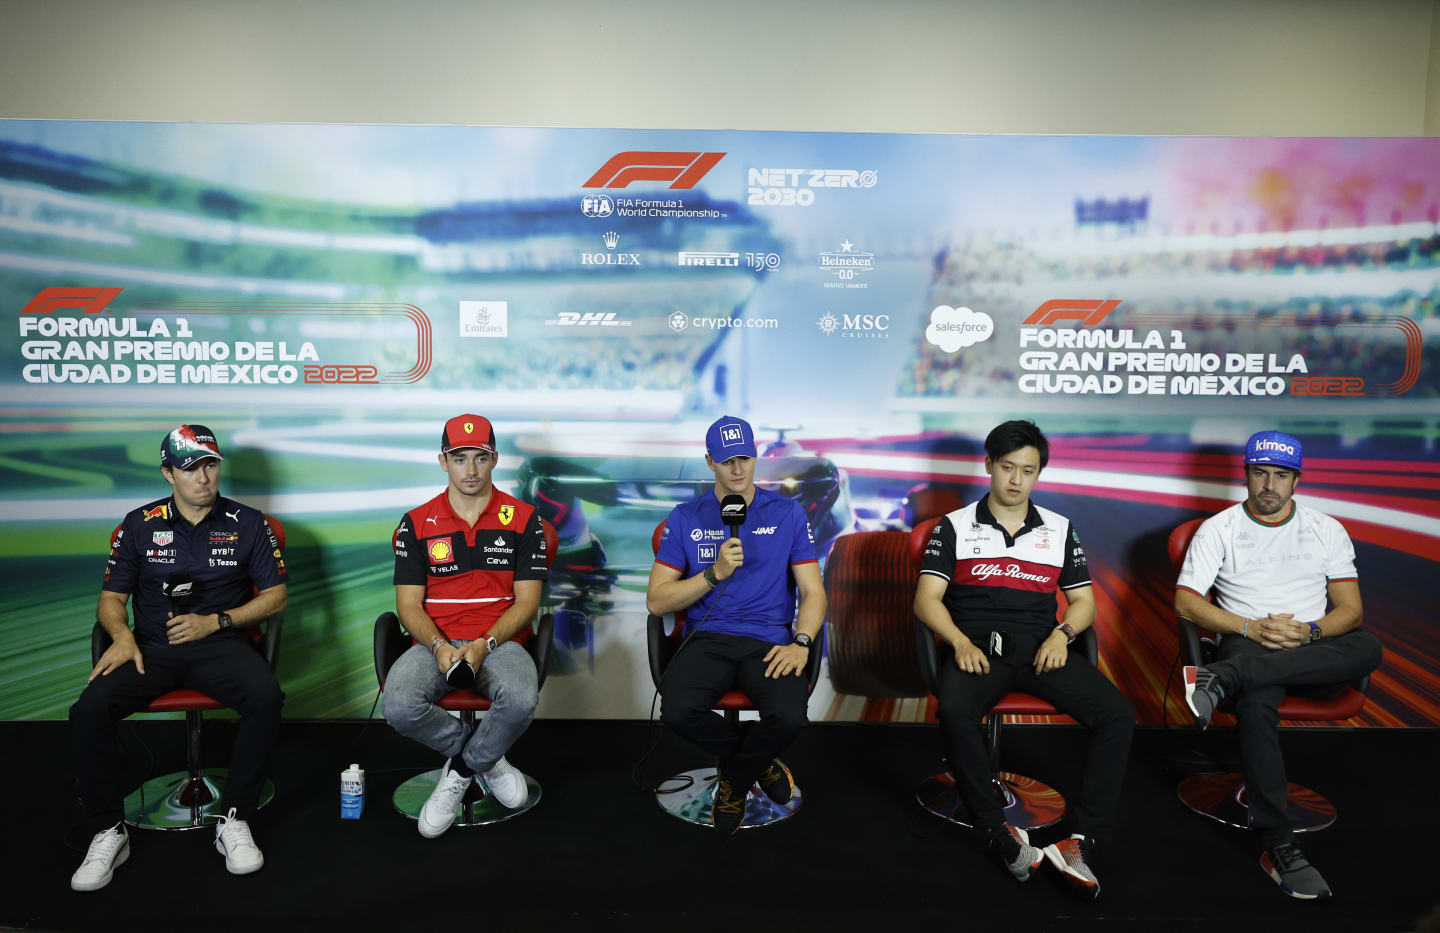 MEXICO CITY, MEXICO - OCTOBER 27: (L-R) Sergio Perez of Mexico and Oracle Red Bull Racing, Charles Leclerc of Monaco and Ferrari, Mick Schumacher of Germany and Haas F1, Zhou Guanyu of China and Alfa Romeo F1 and Fernando Alonso of Spain and Alpine F1 attend the Drivers Press Conference  during previews ahead of the F1 Grand Prix of Mexico at Autodromo Hermanos Rodriguez on October 27, 2022 in Mexico City, Mexico. (Photo by Jared C. Tilton/Getty Images)